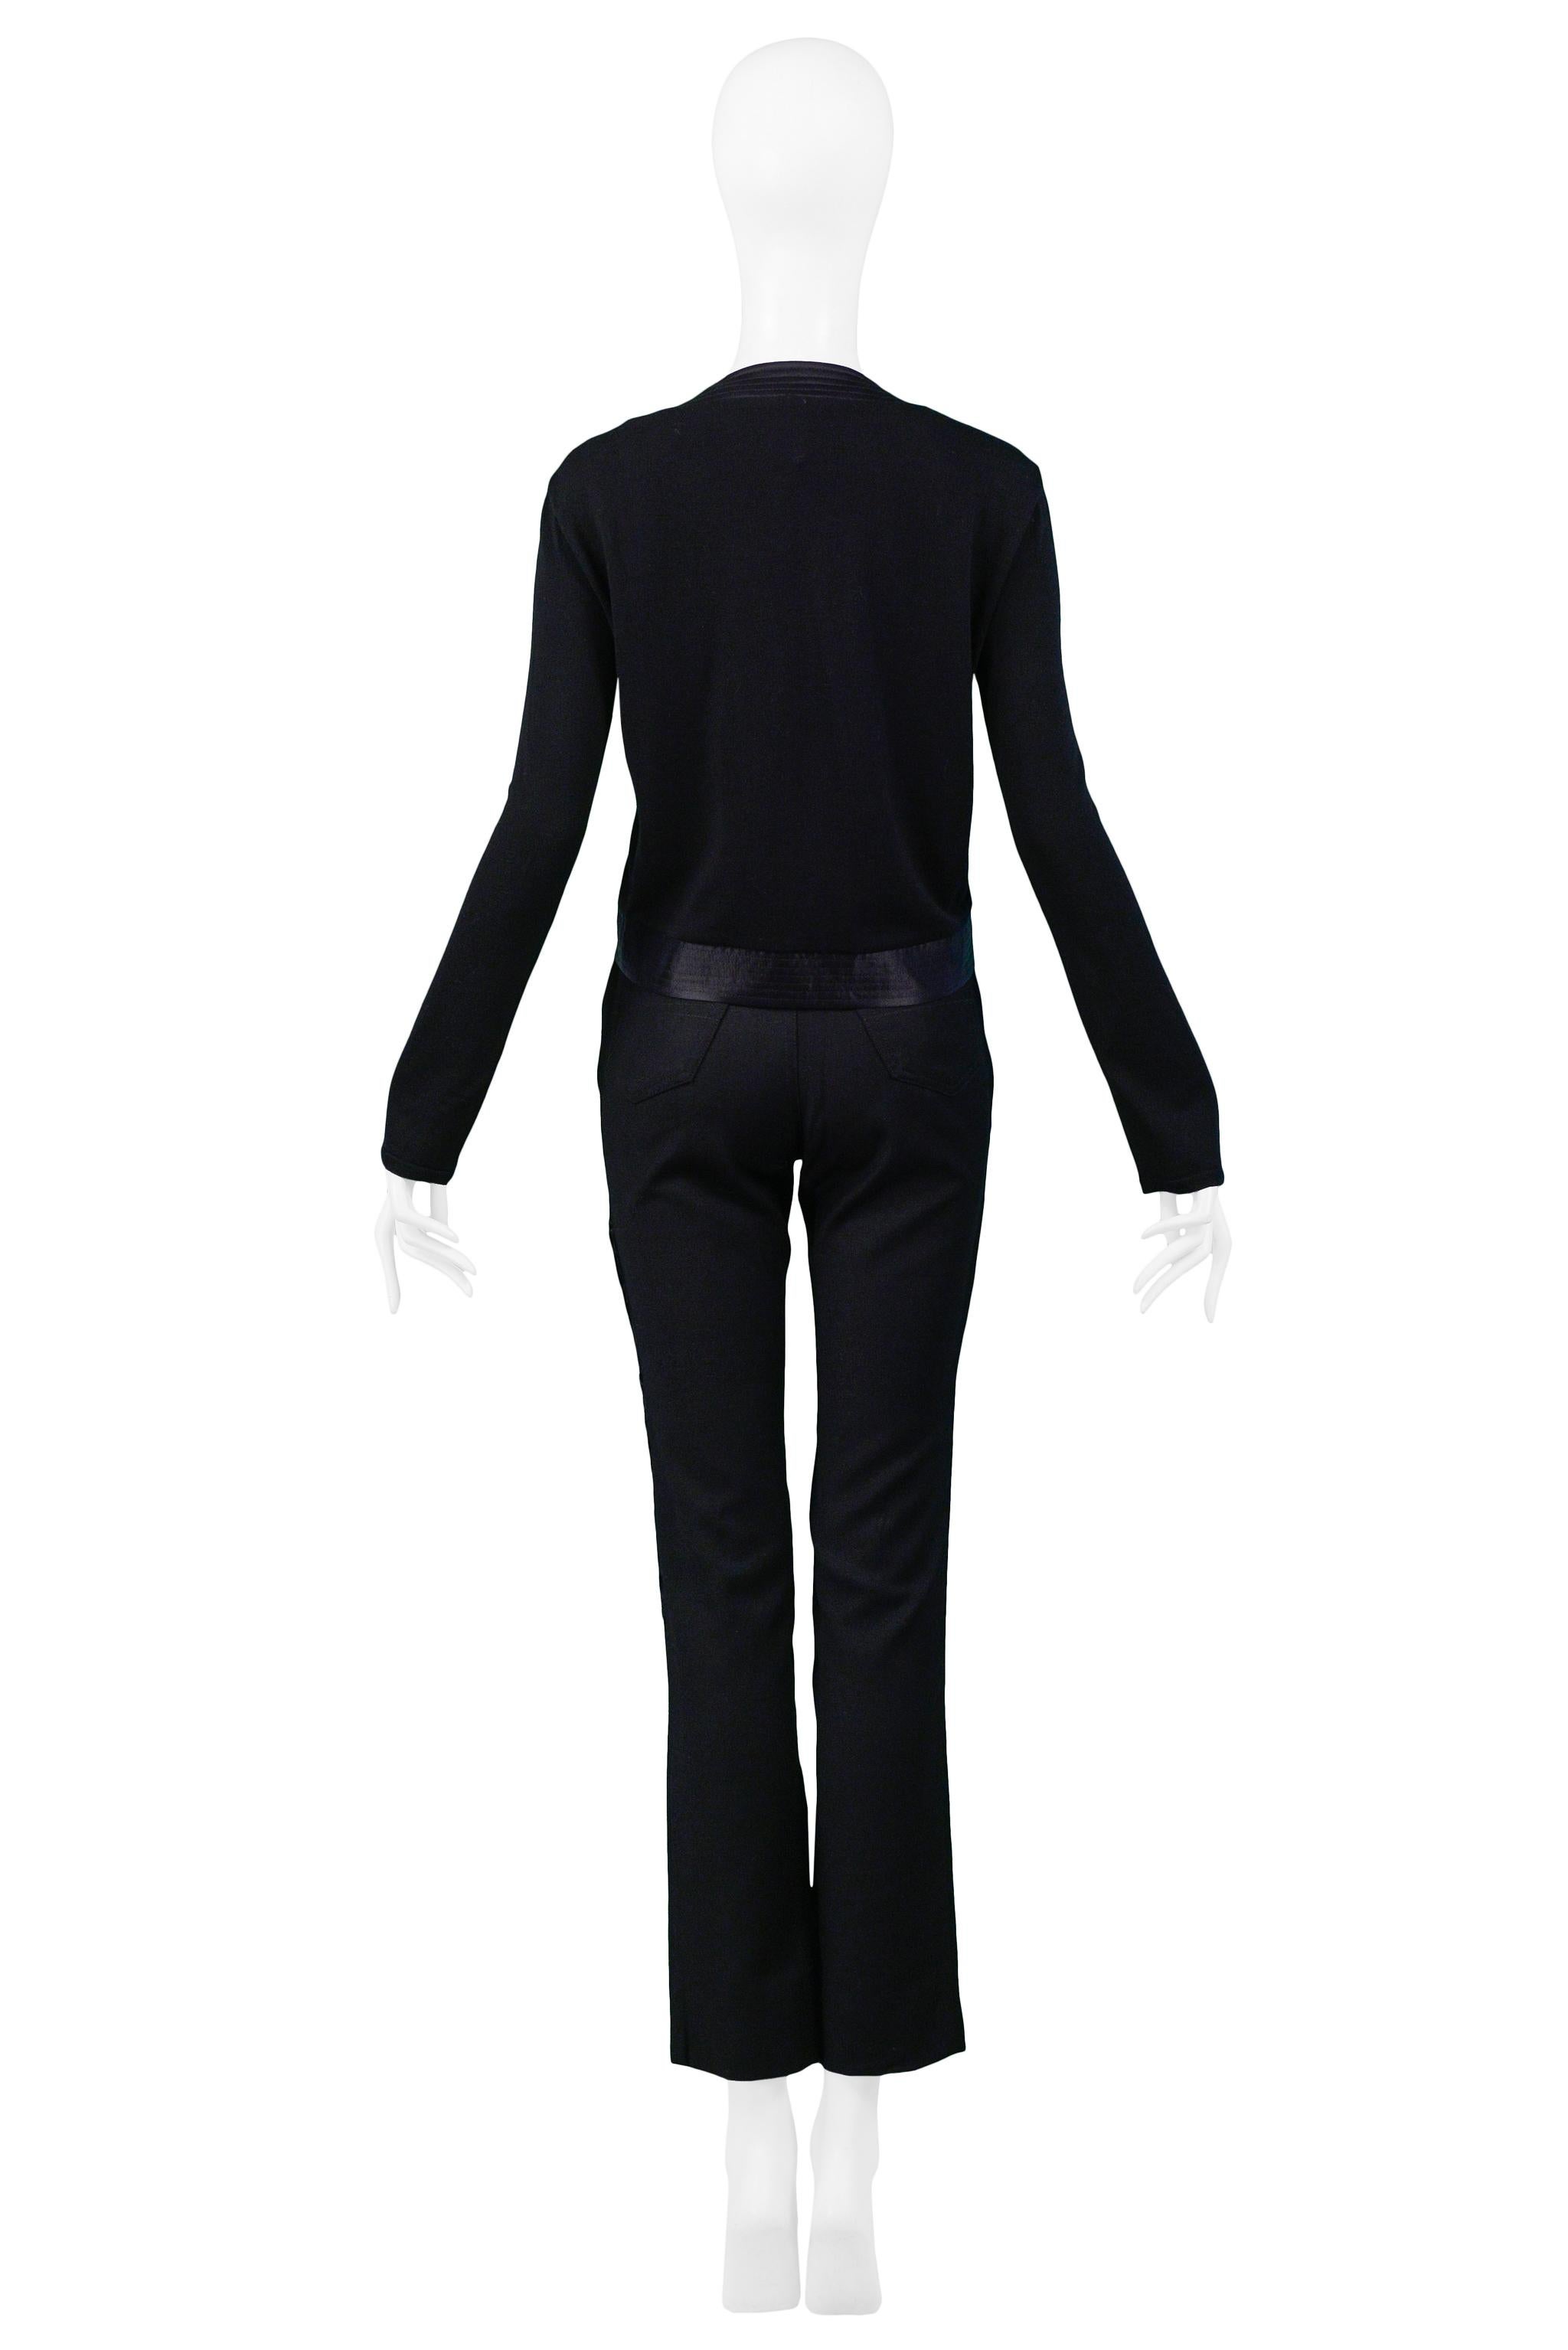 Gianfranco Ferre Black Fur Textured Twin Set Cardigan, Shell Sweater and Pants  For Sale 5